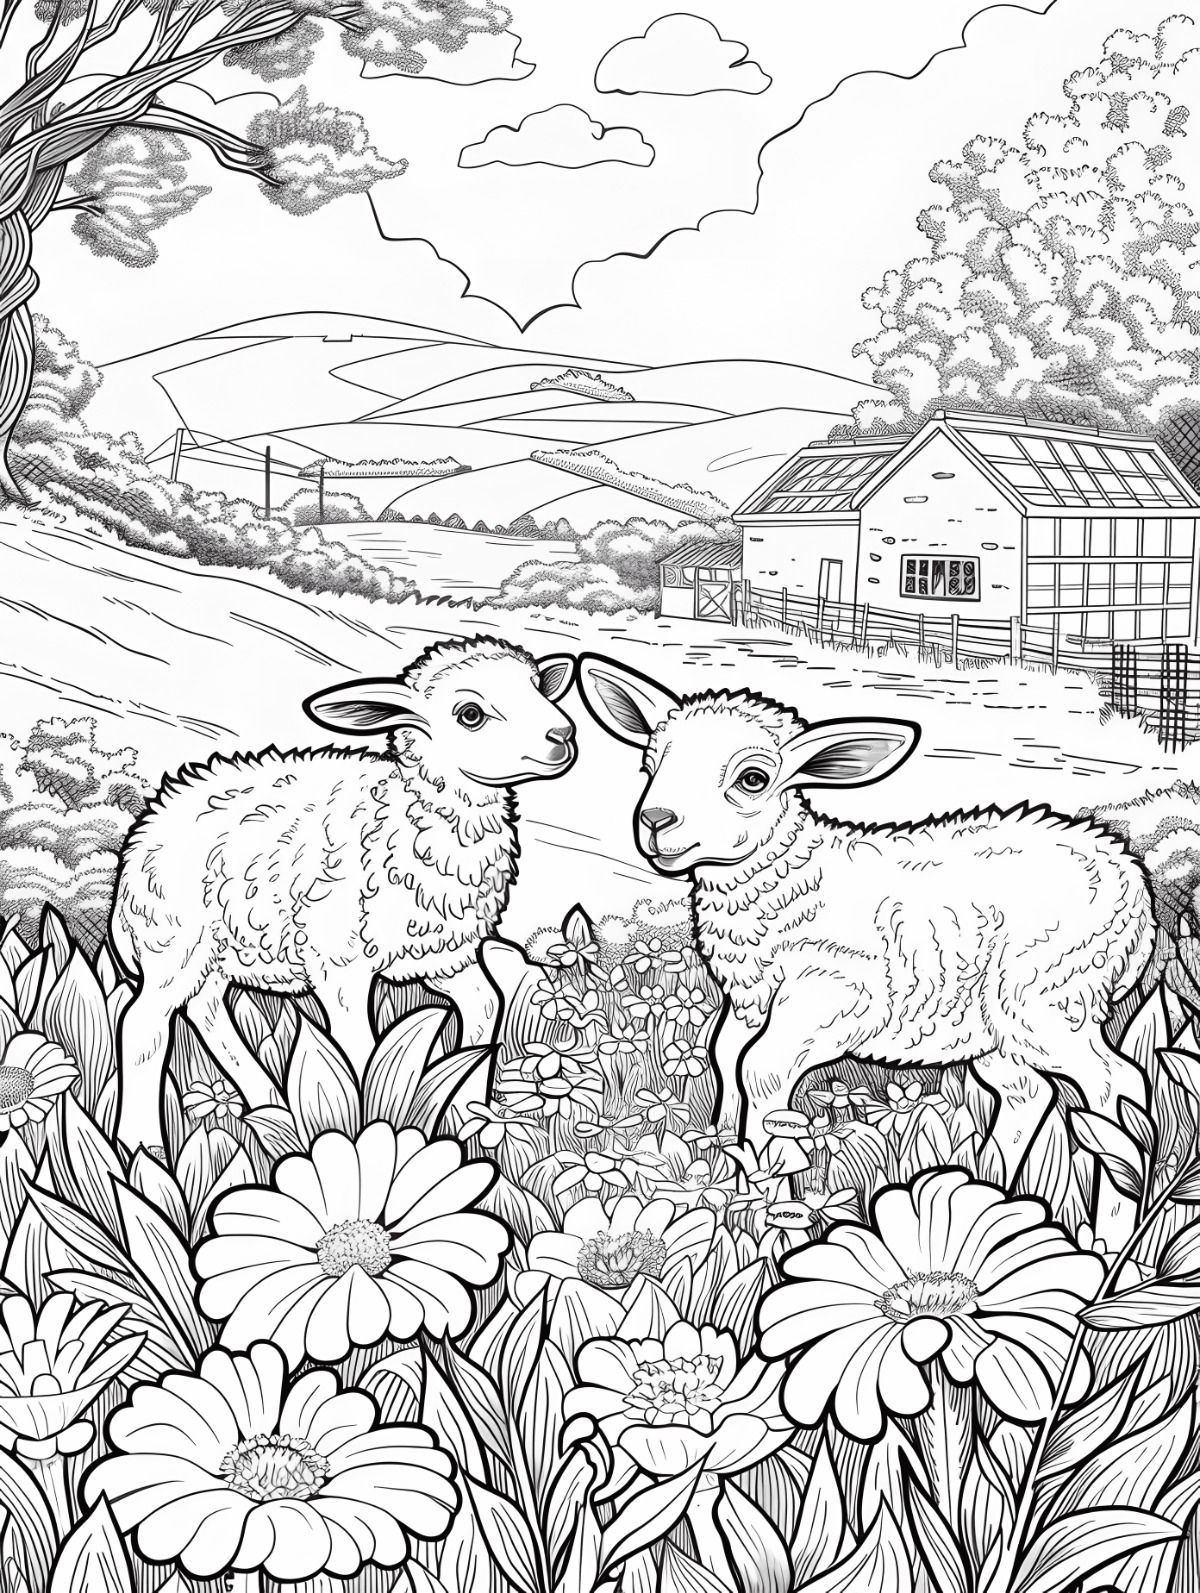 30 Easter Coloring Pages for Adult Mindfulness